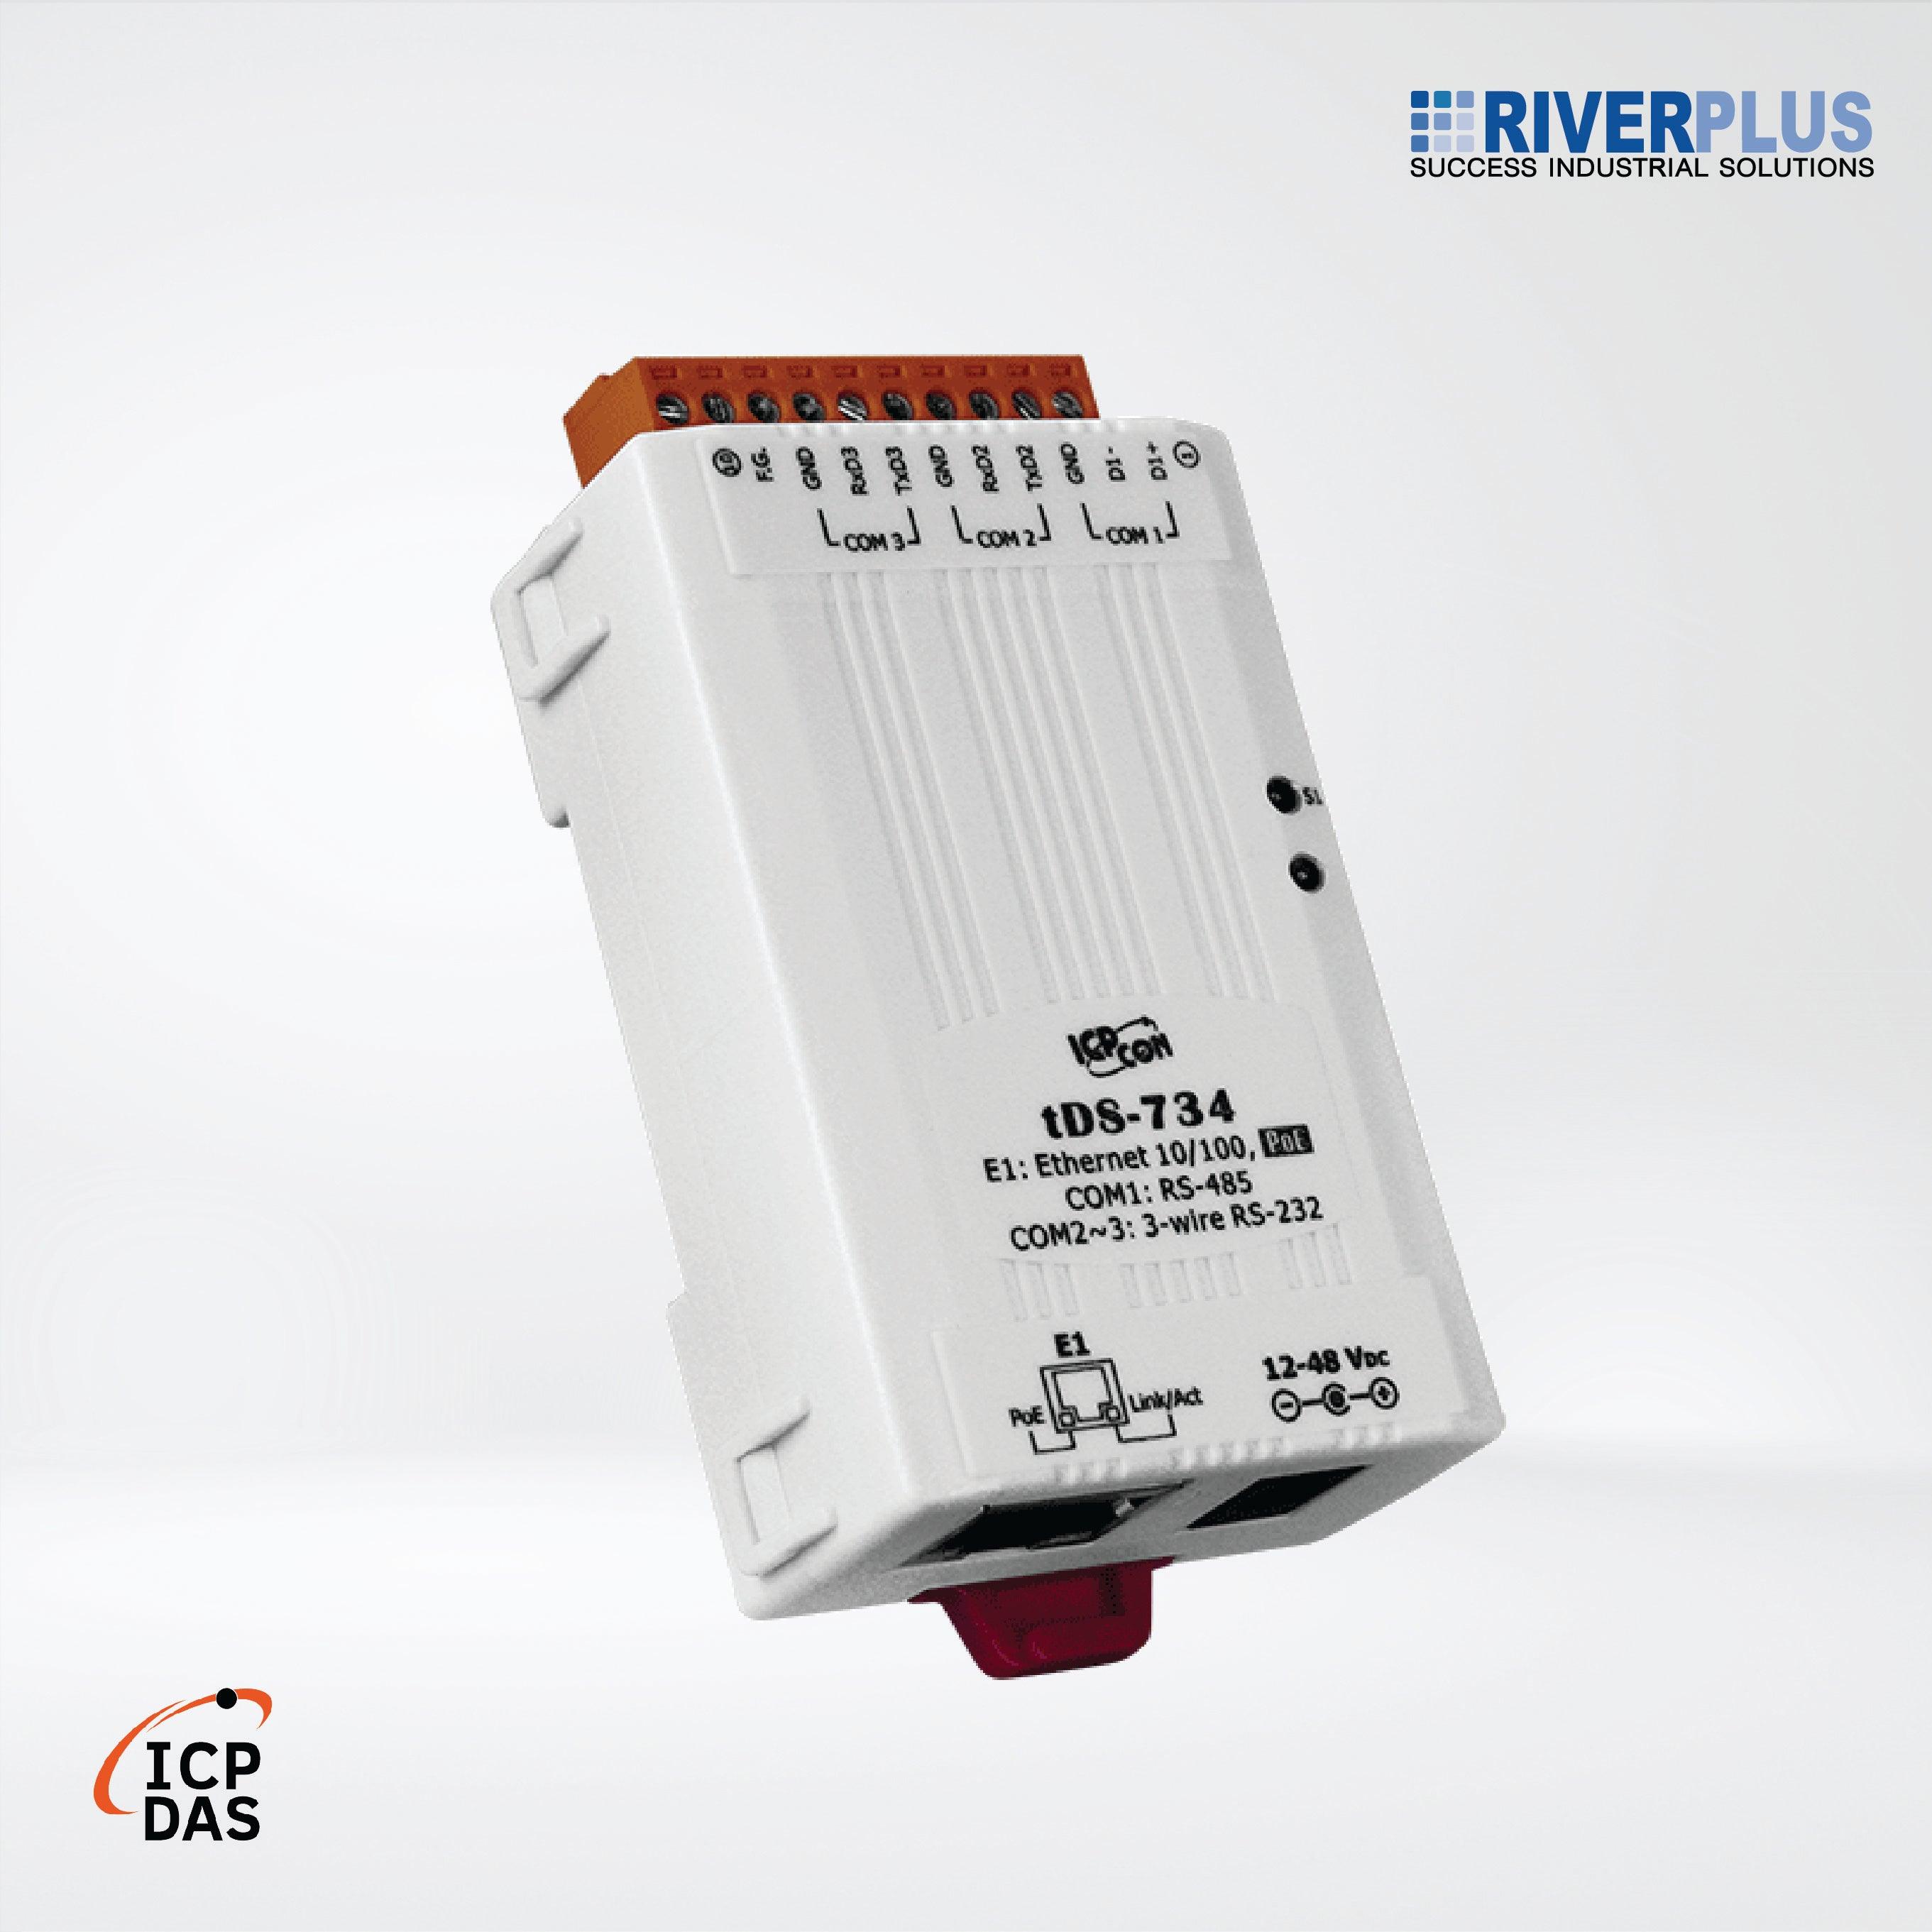 tDS-734 CR Tiny (2x RS-232 and 1x RS-485) Serial-to-Ethernet Device Server with PoE - Riverplus